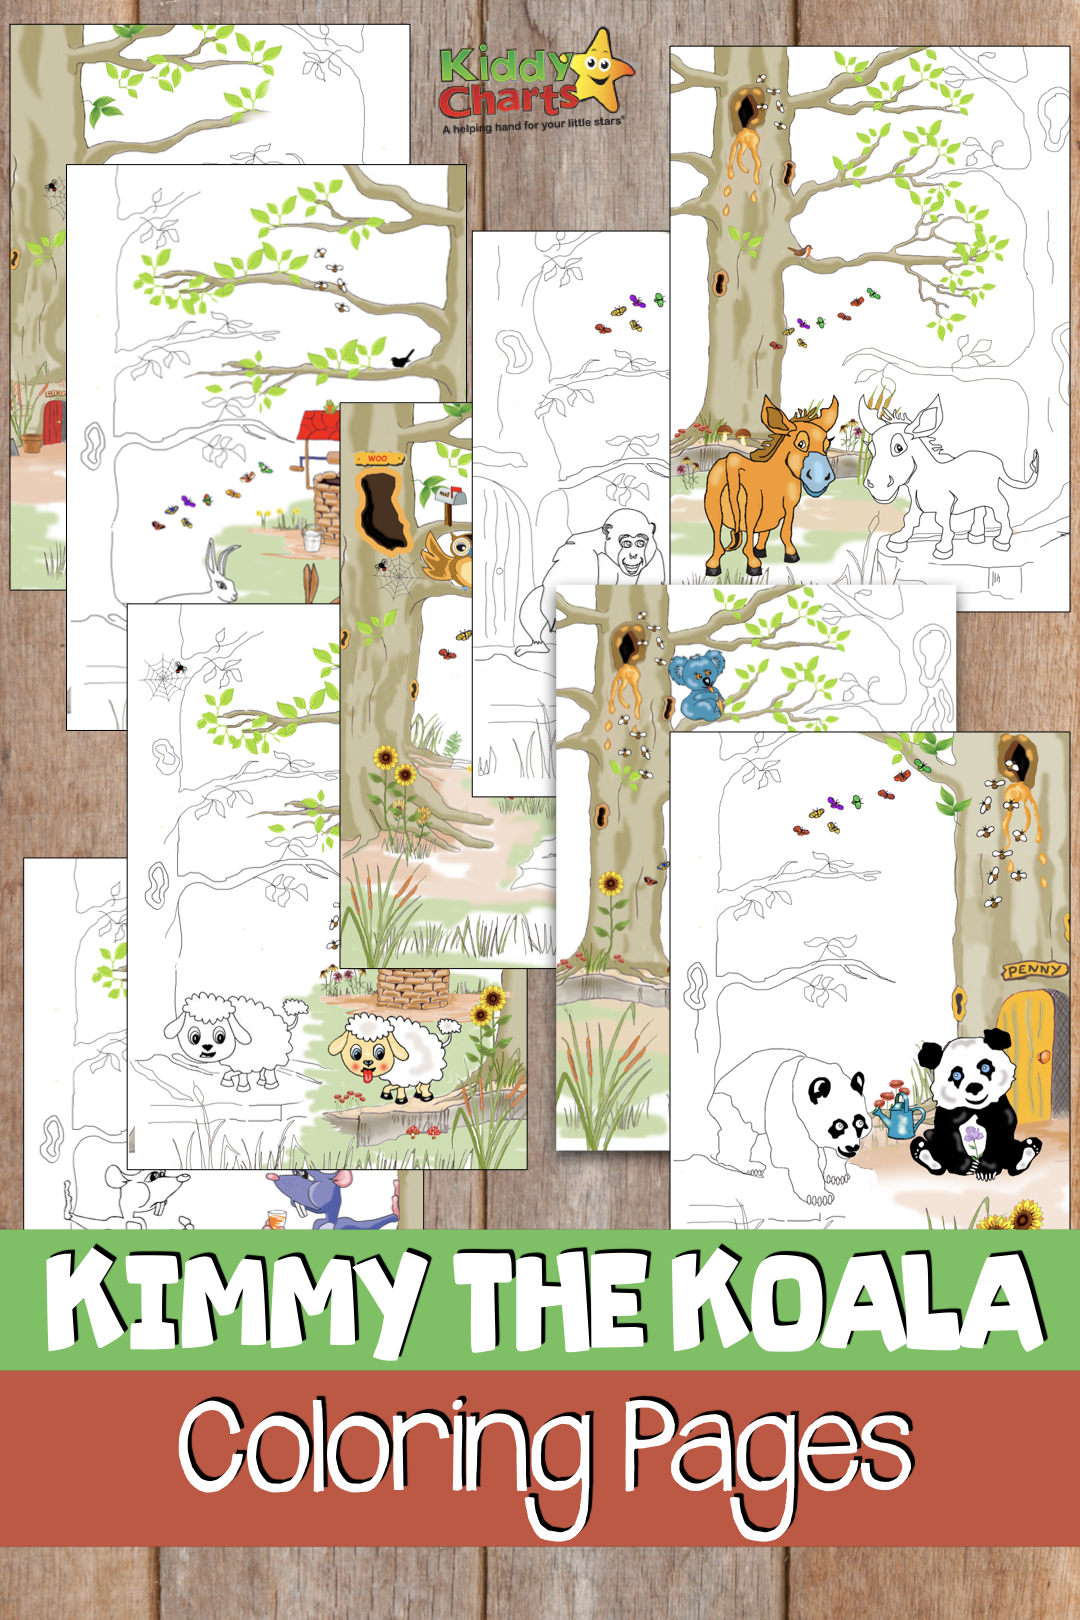 We have a lovely new treat for you today; some koala coloring pages, and other fabulous characters too, from a wonderful new book; Kimmy the Koala Helps the Honey Bees. #koalas #coloring #kidscoloring #australia #homeschooling